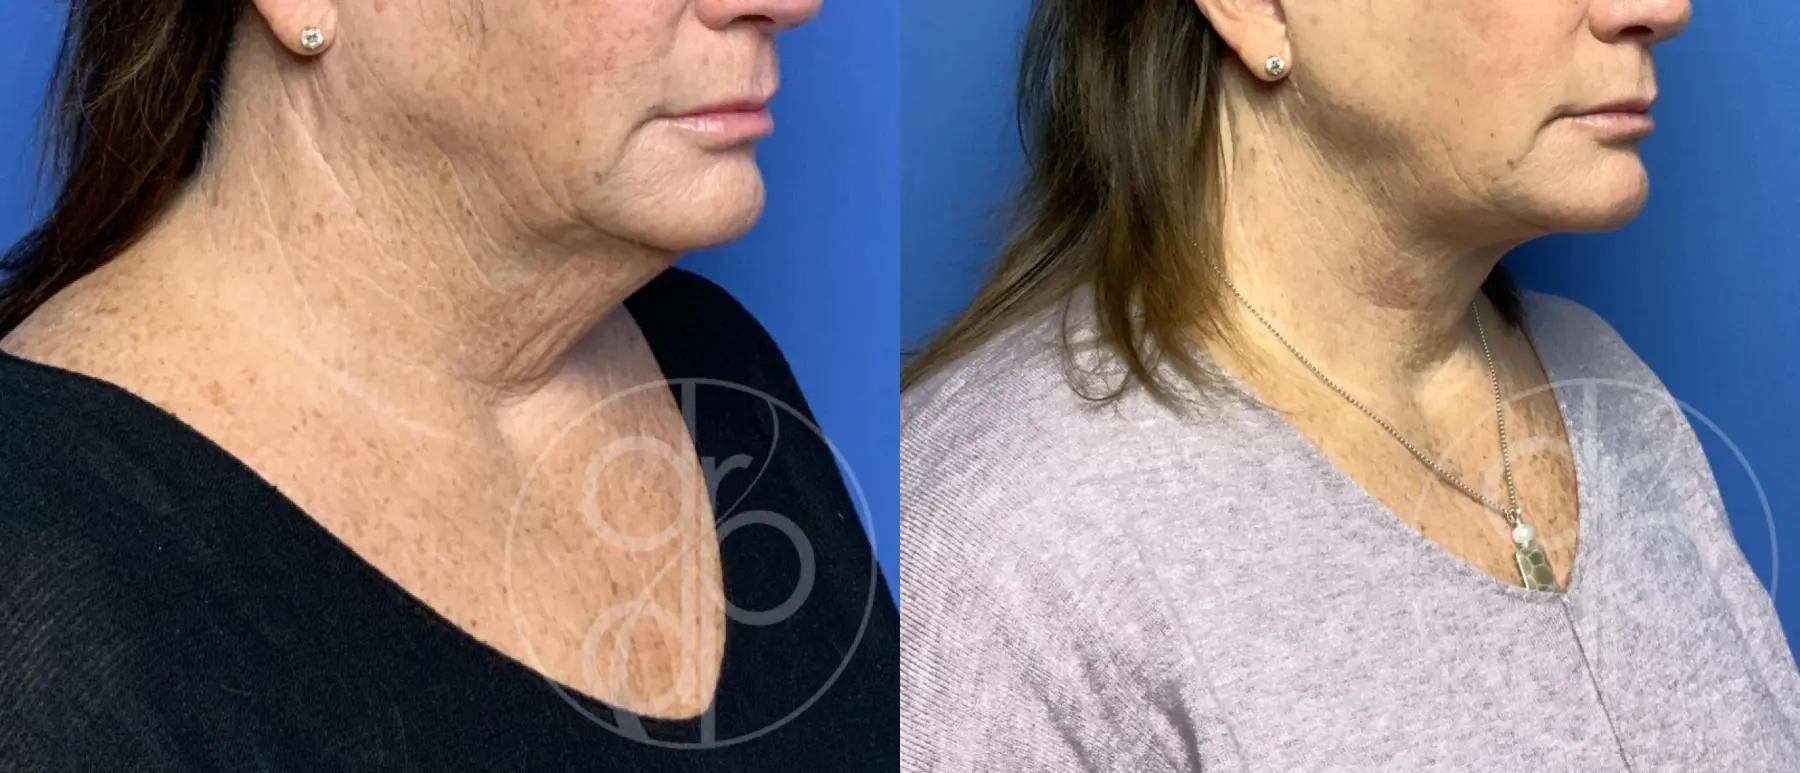 patient 11909 neck lift before and after result - Before and After